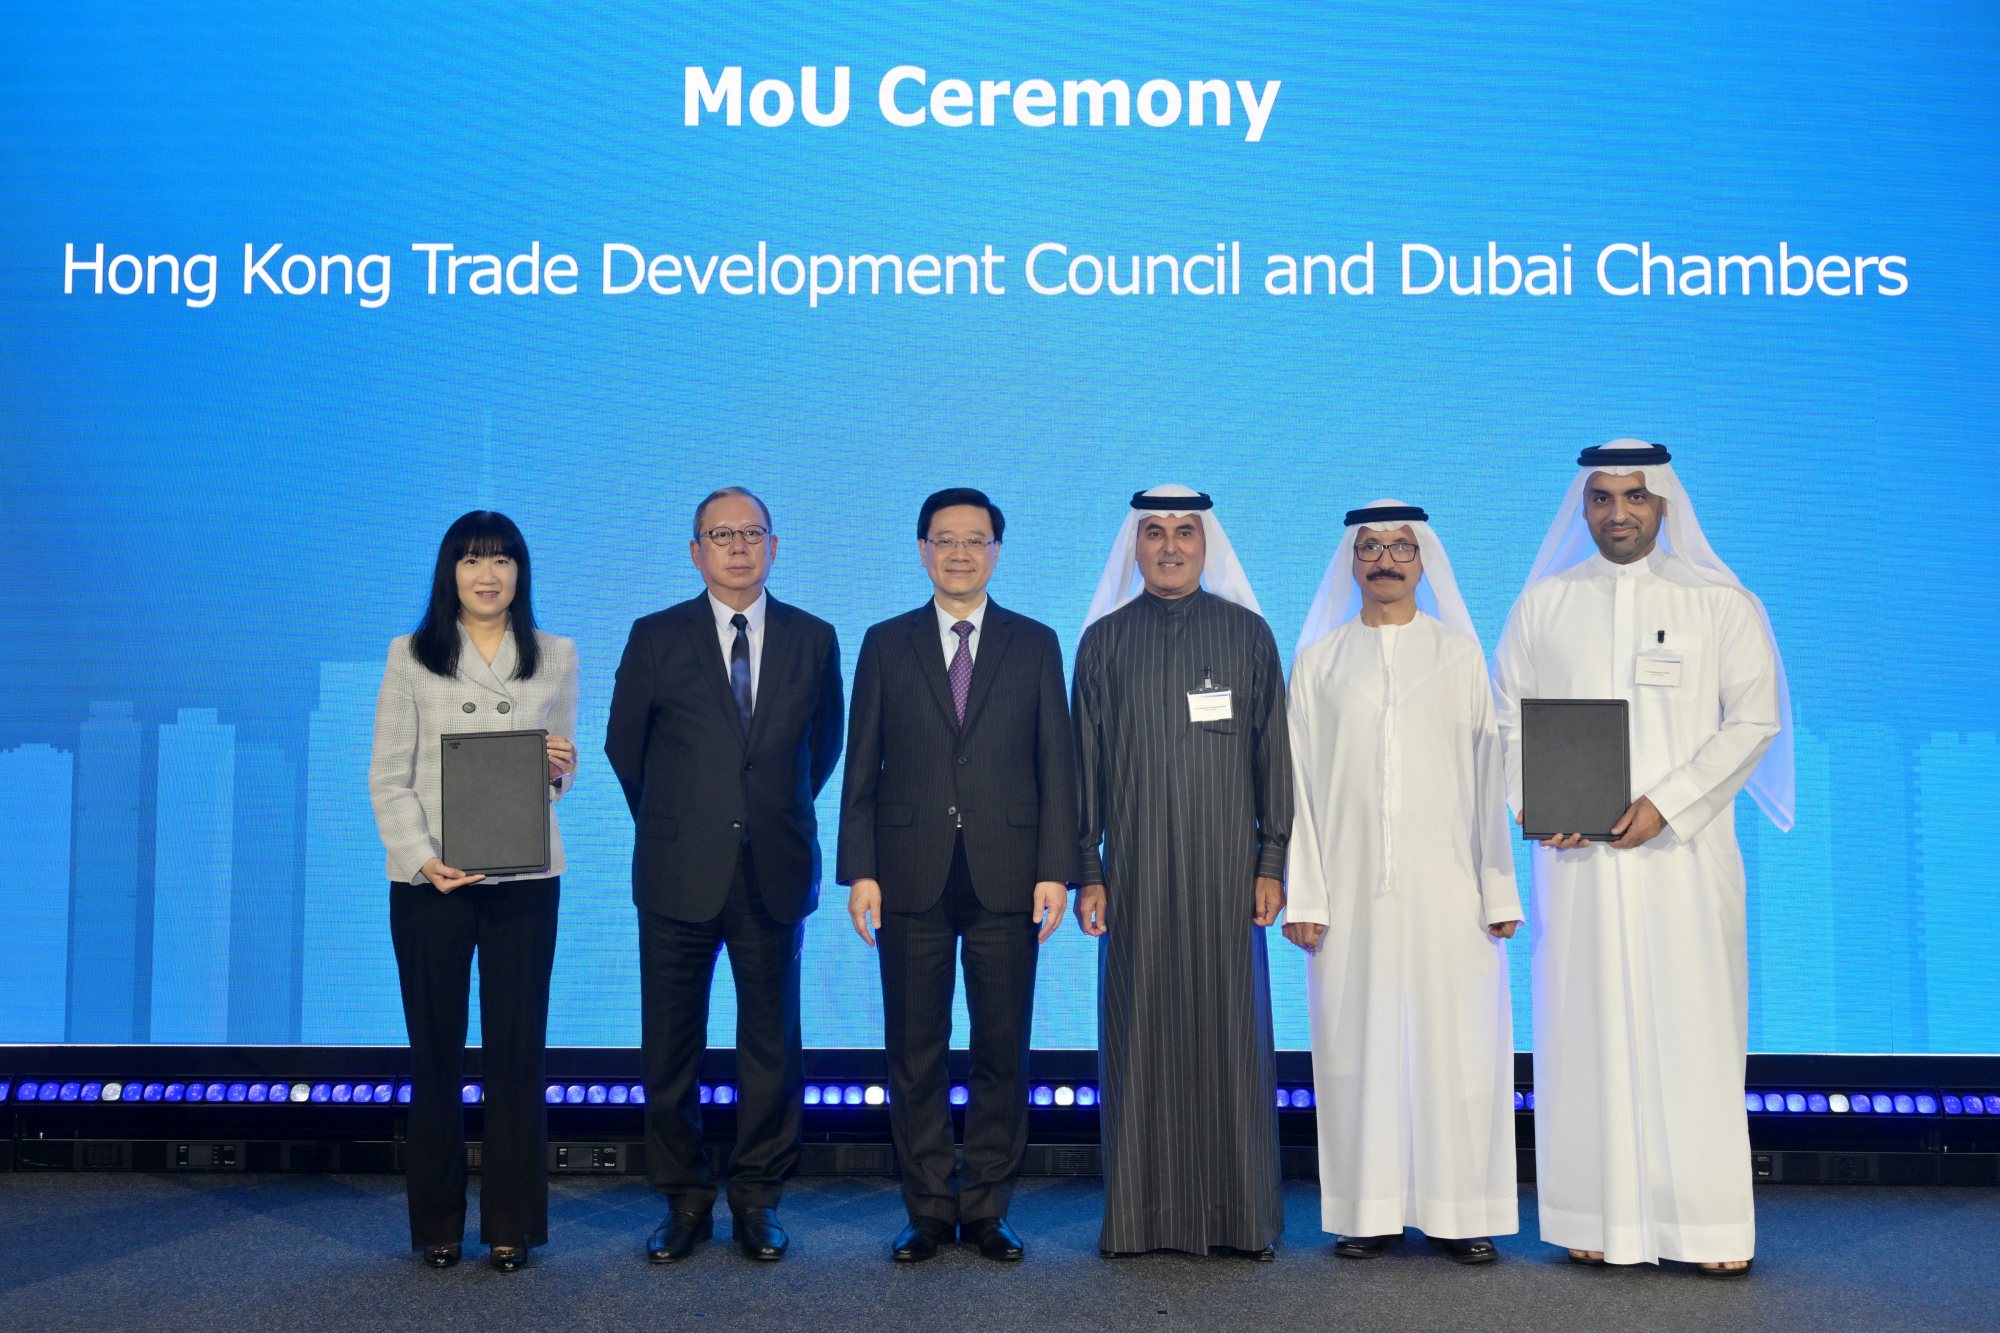 The Trade Development Council and Dubai Chambers exchanged an MOU at the forum. Photo: SCMP